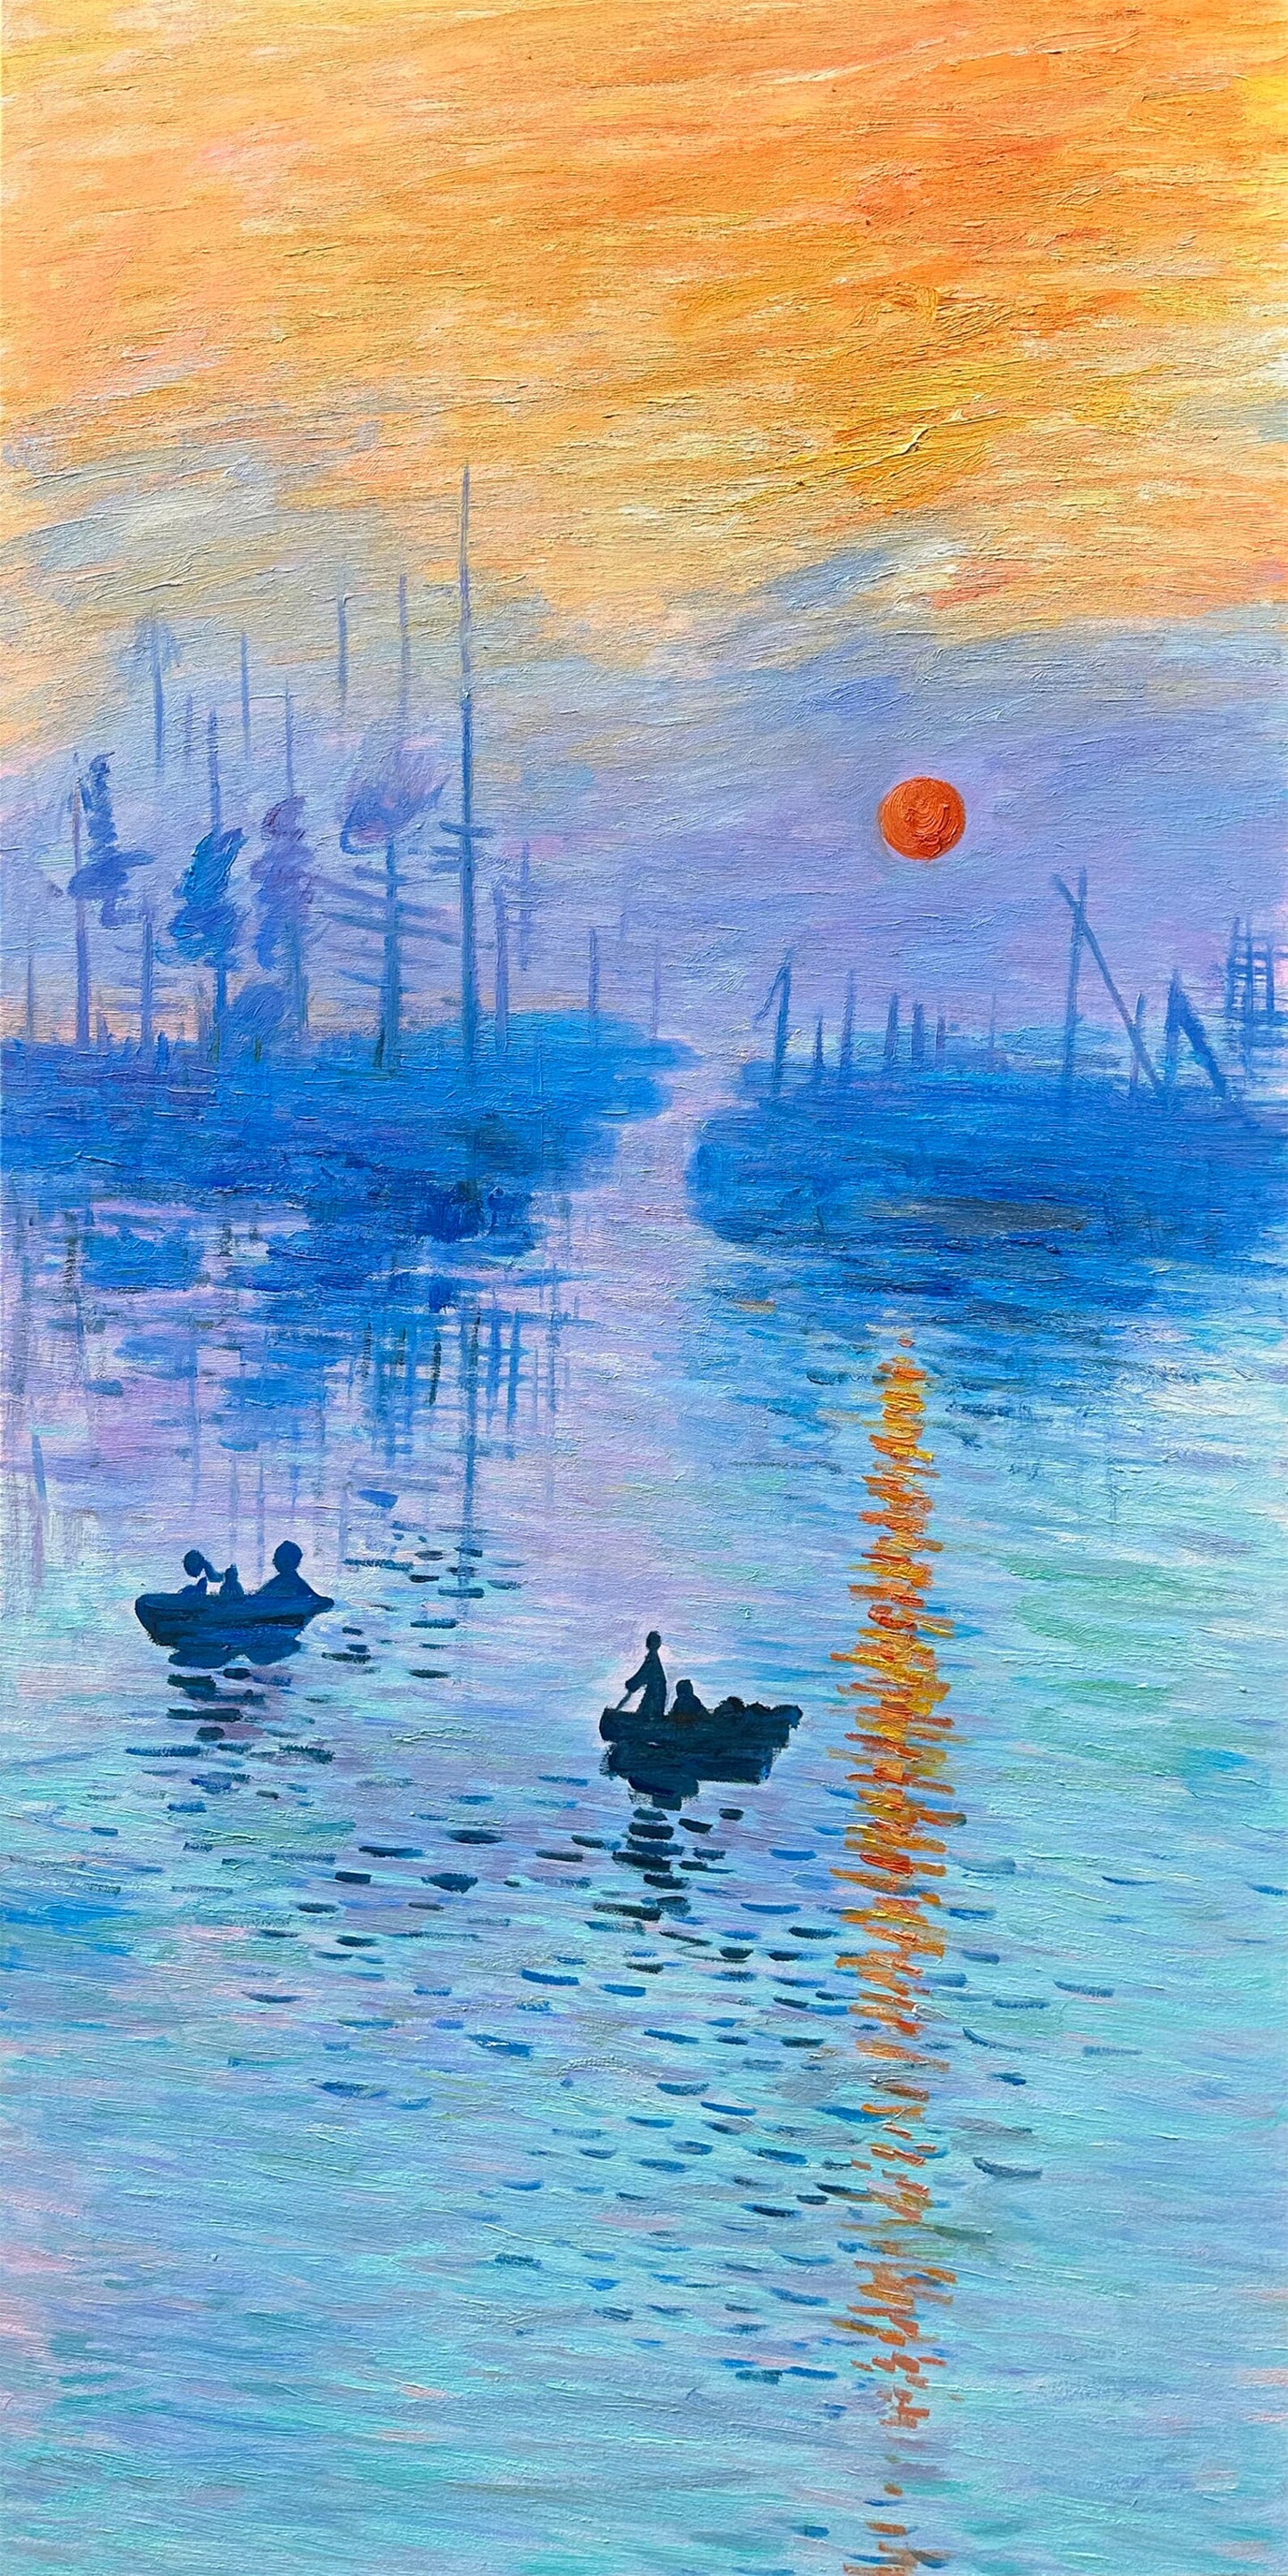 Hand-painted Impression Art "Sunrise" Gallery wall set, Home decor - Wrapped Canvas Painting